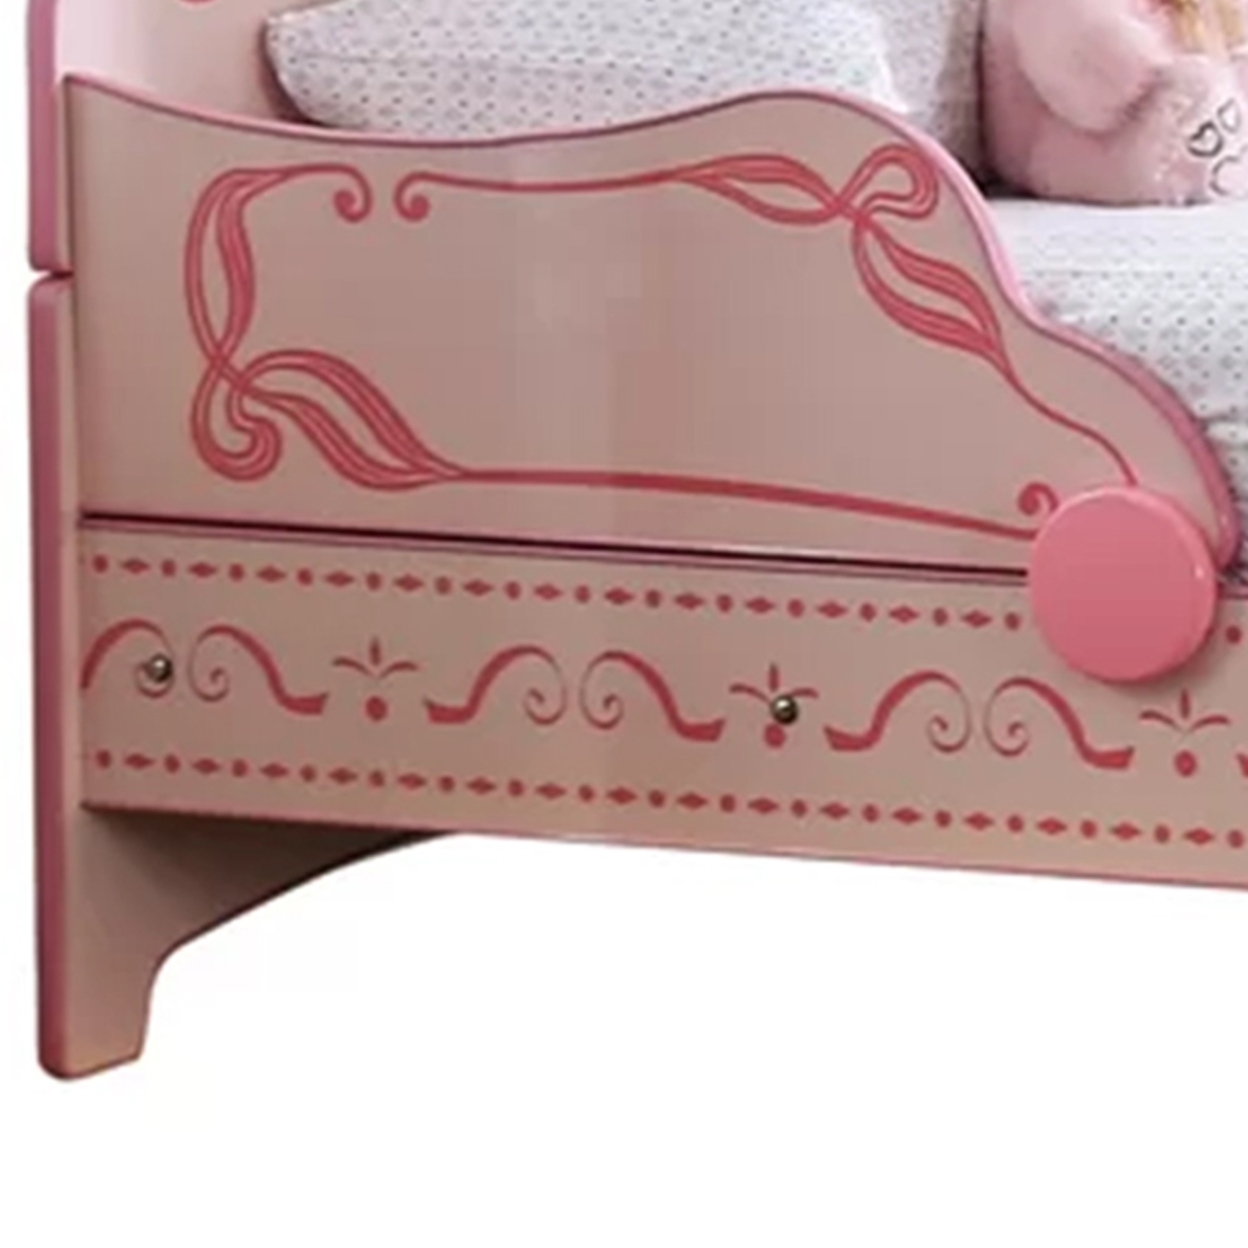 Twin Bed With MDF Scalloped And Scroll Motif Design, Pink- Saltoro Sherpi